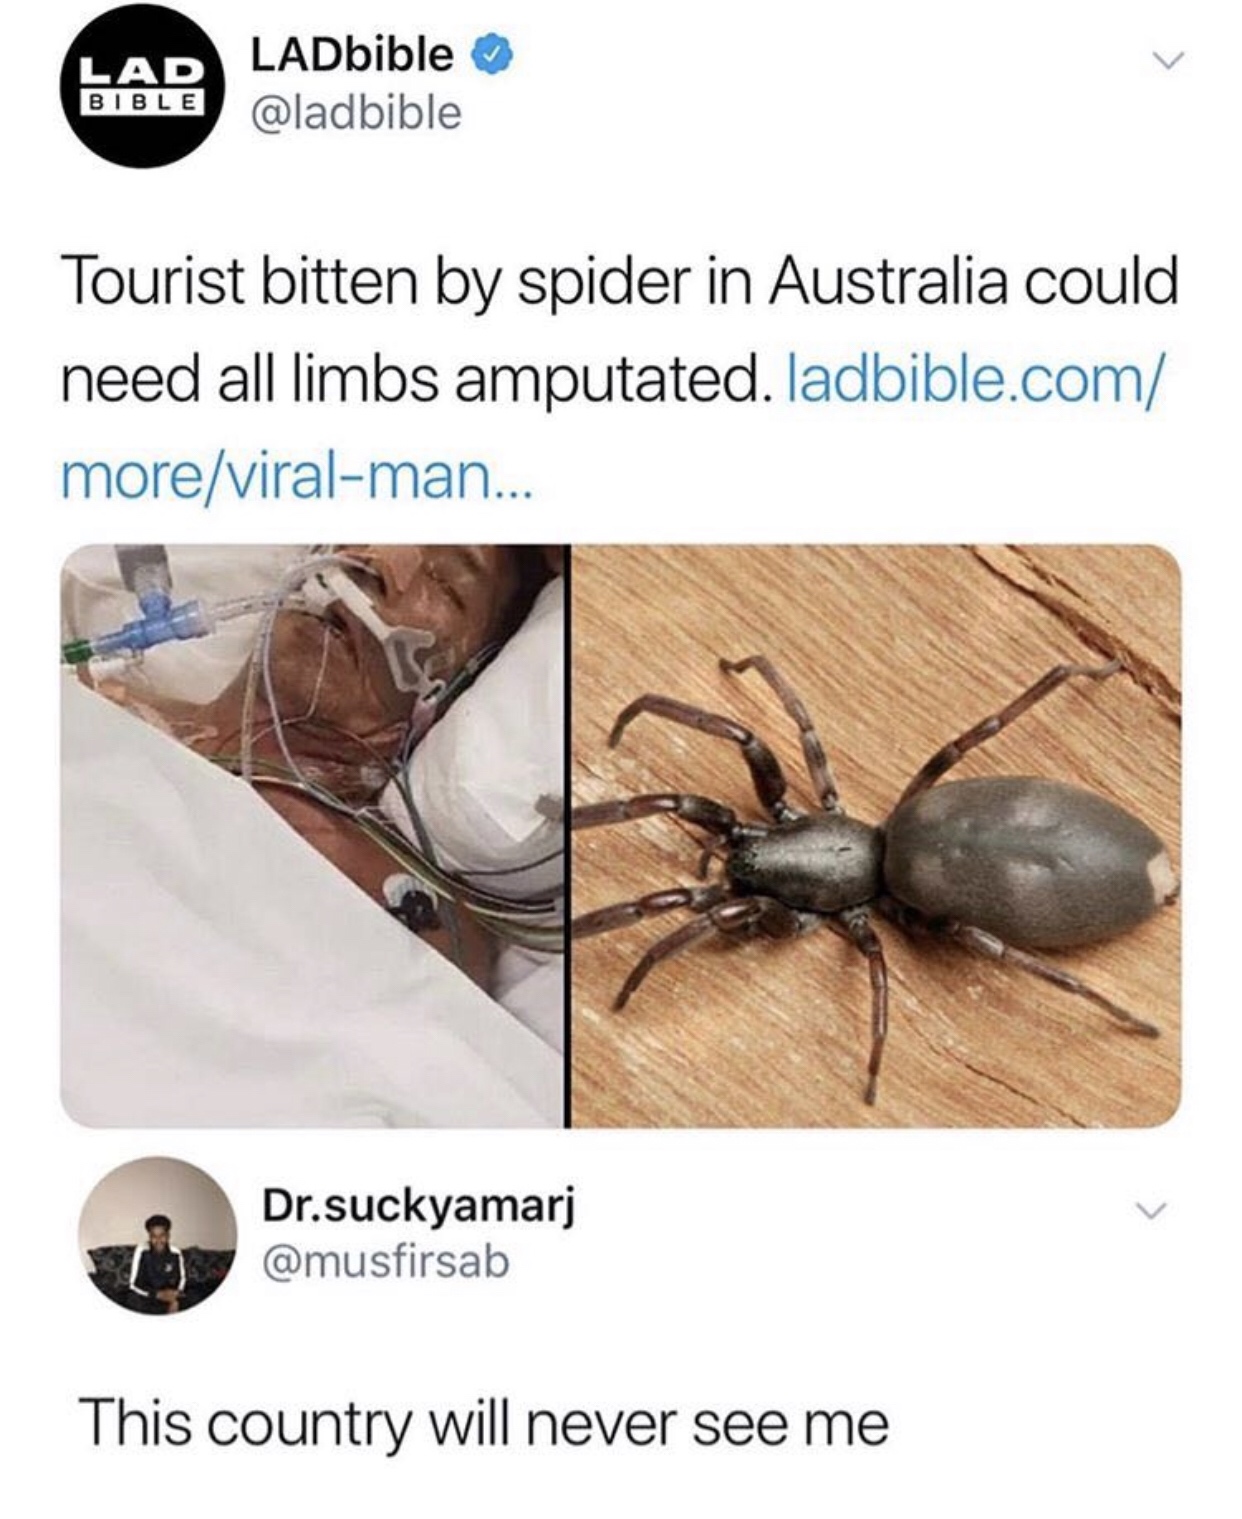 lad bible funny - Lad Bible LADbible Tourist bitten by spider in Australia could need all limbs amputated. ladbible.com moreviralman... Dr.suckyamarj This country will never see me